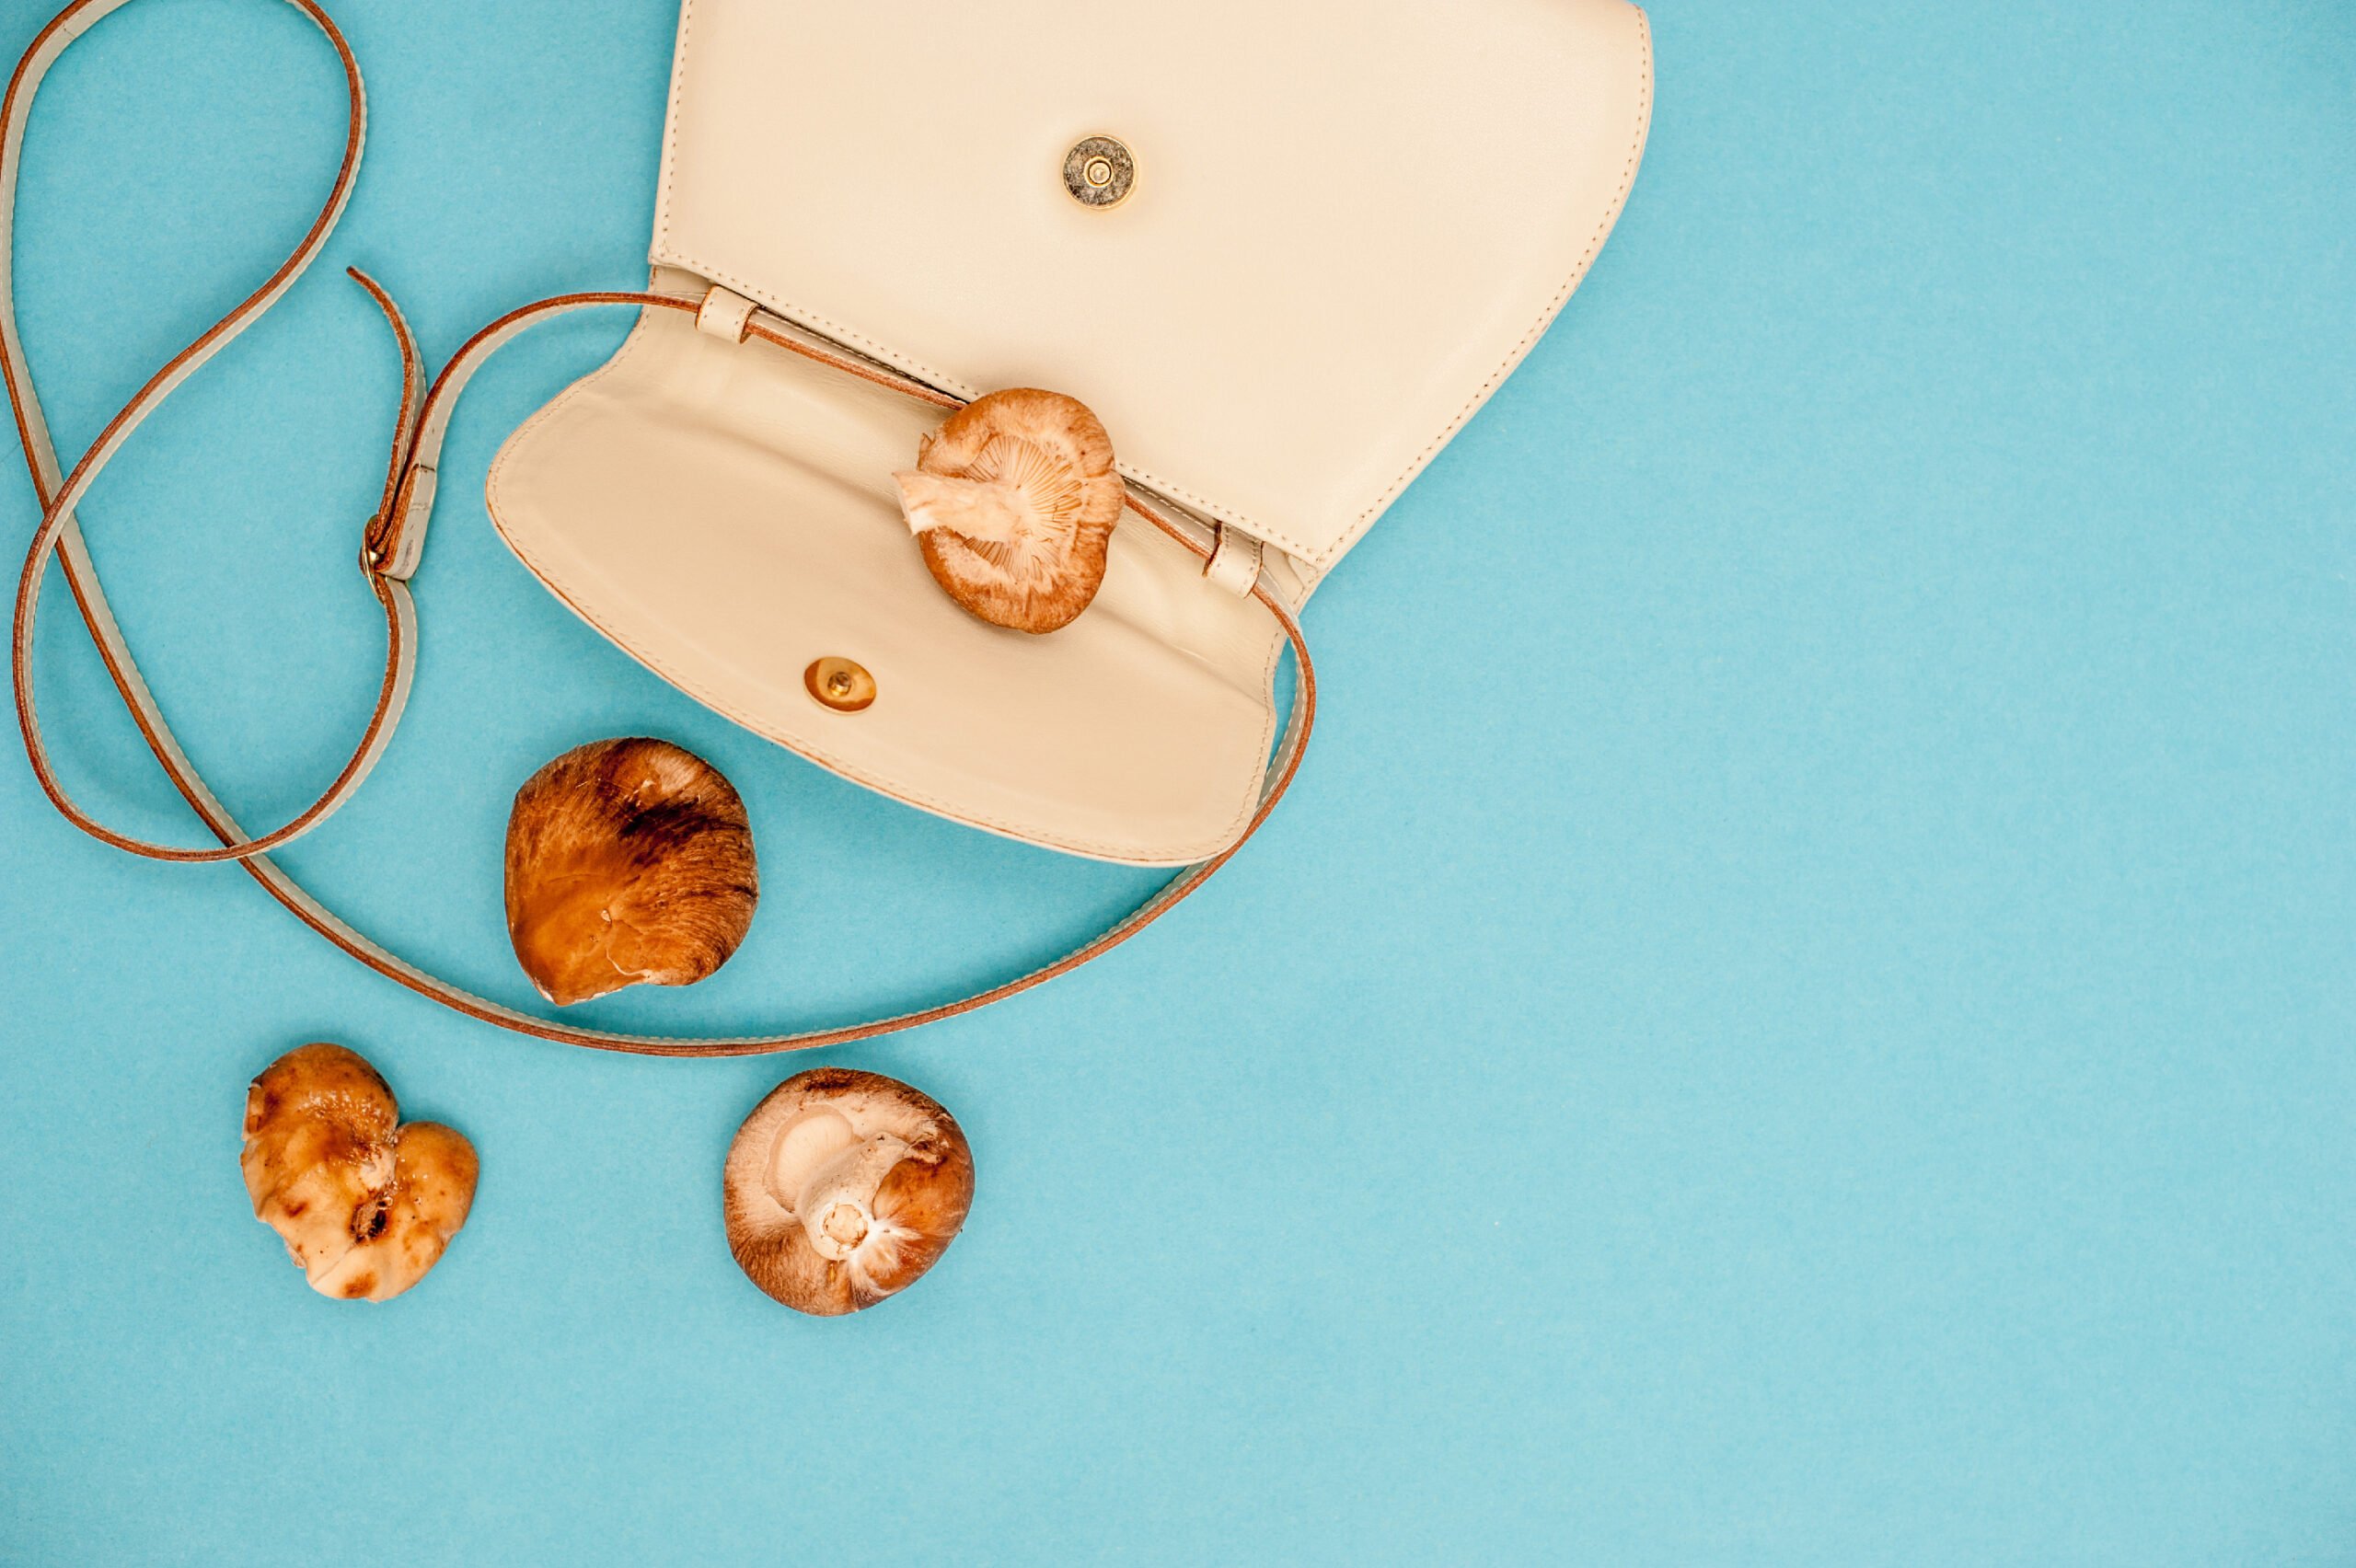 In fashion, the mushroom stands out as a plant-based alternative to leather